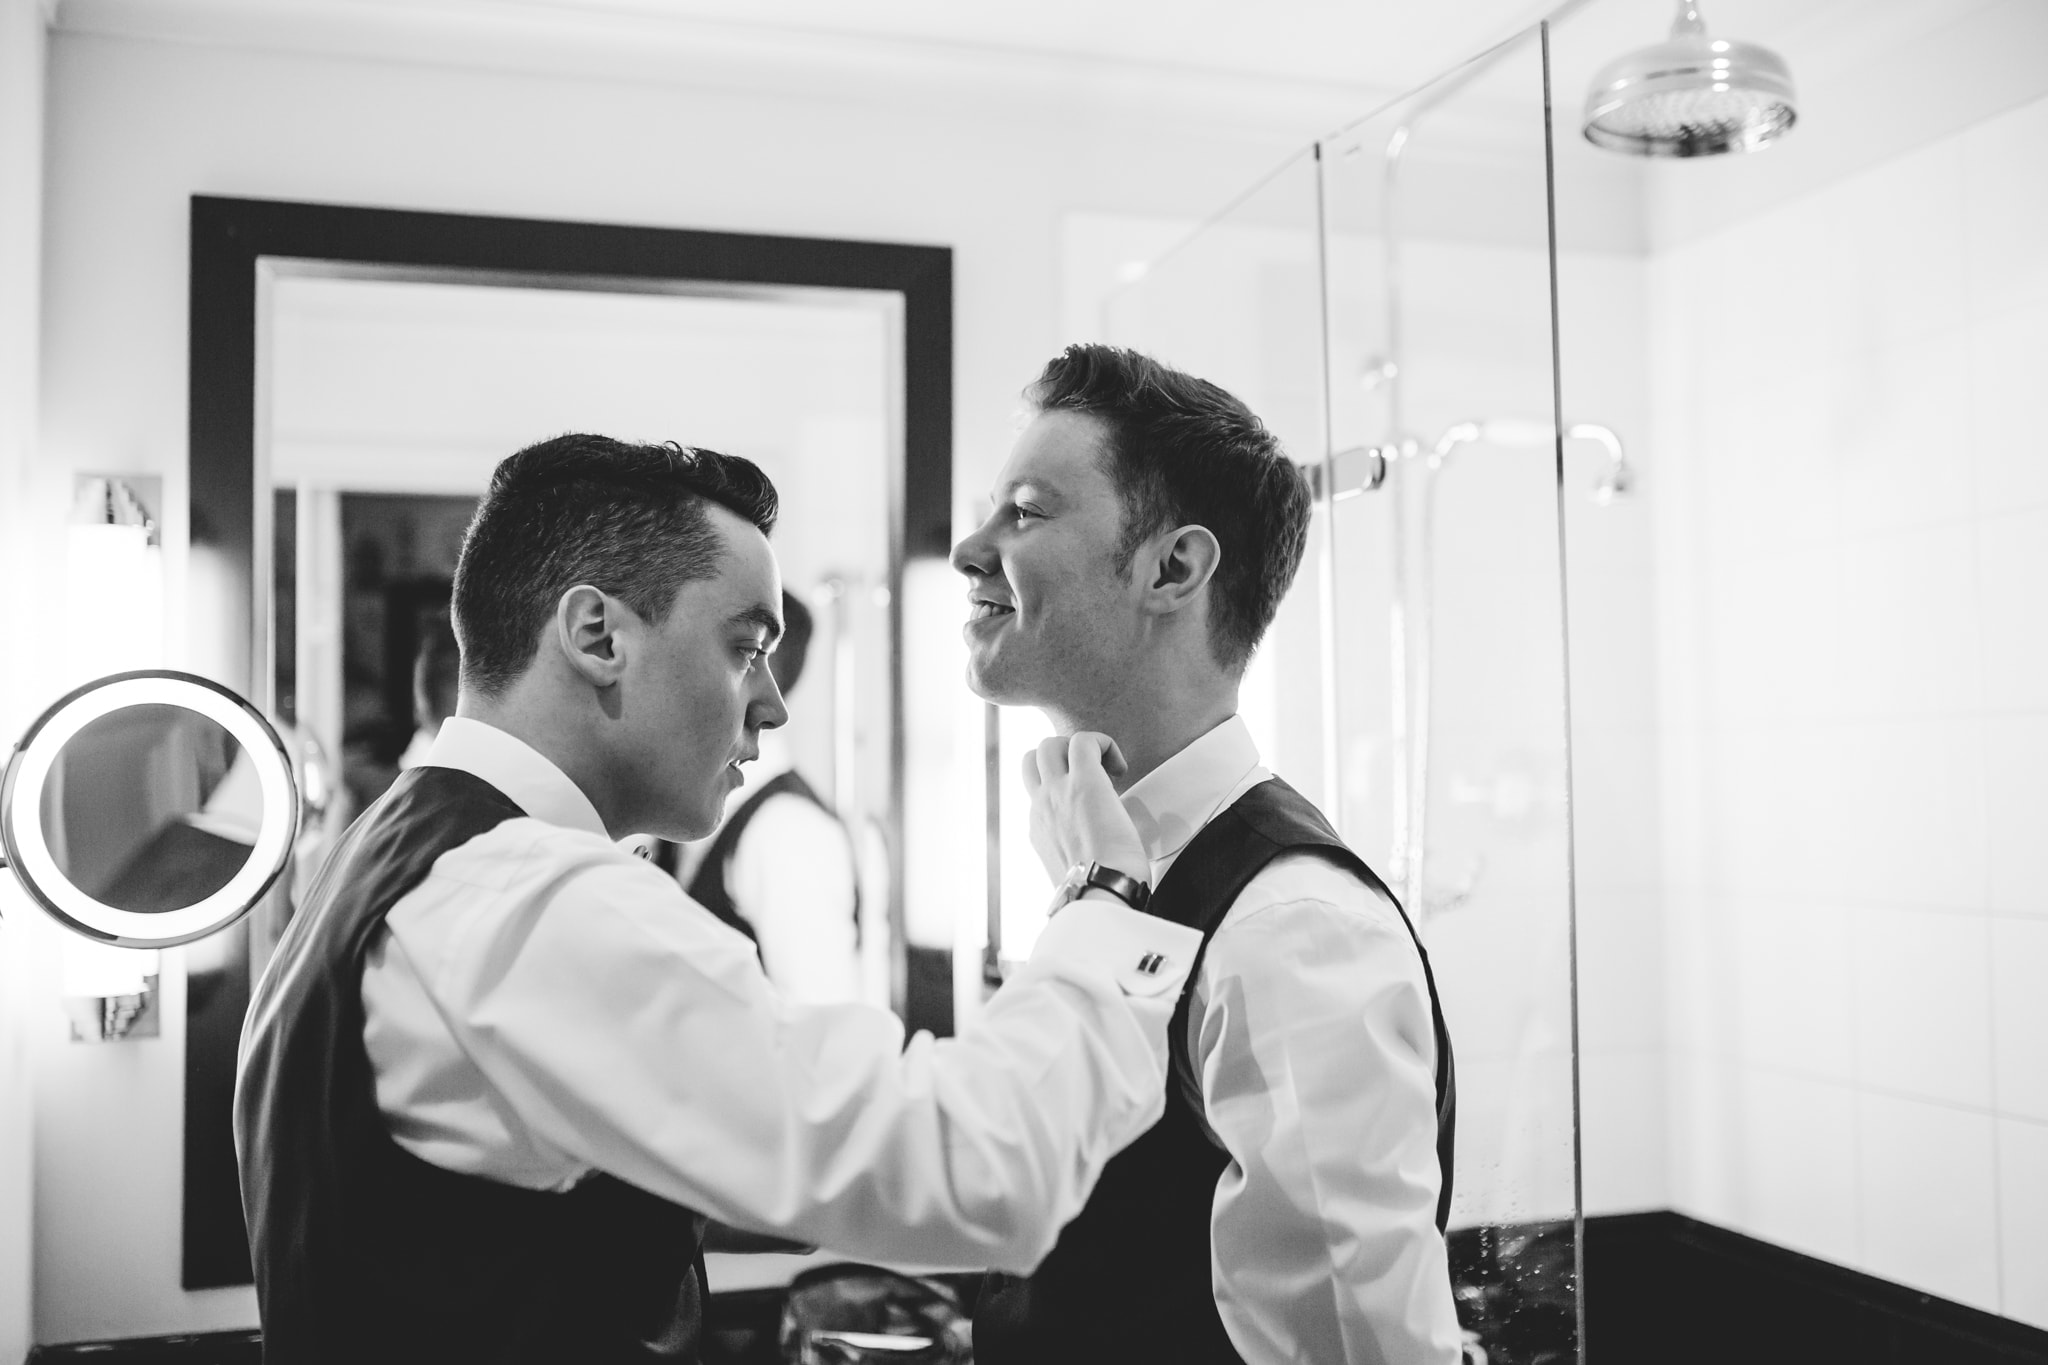 Grooms getting ready before wedding